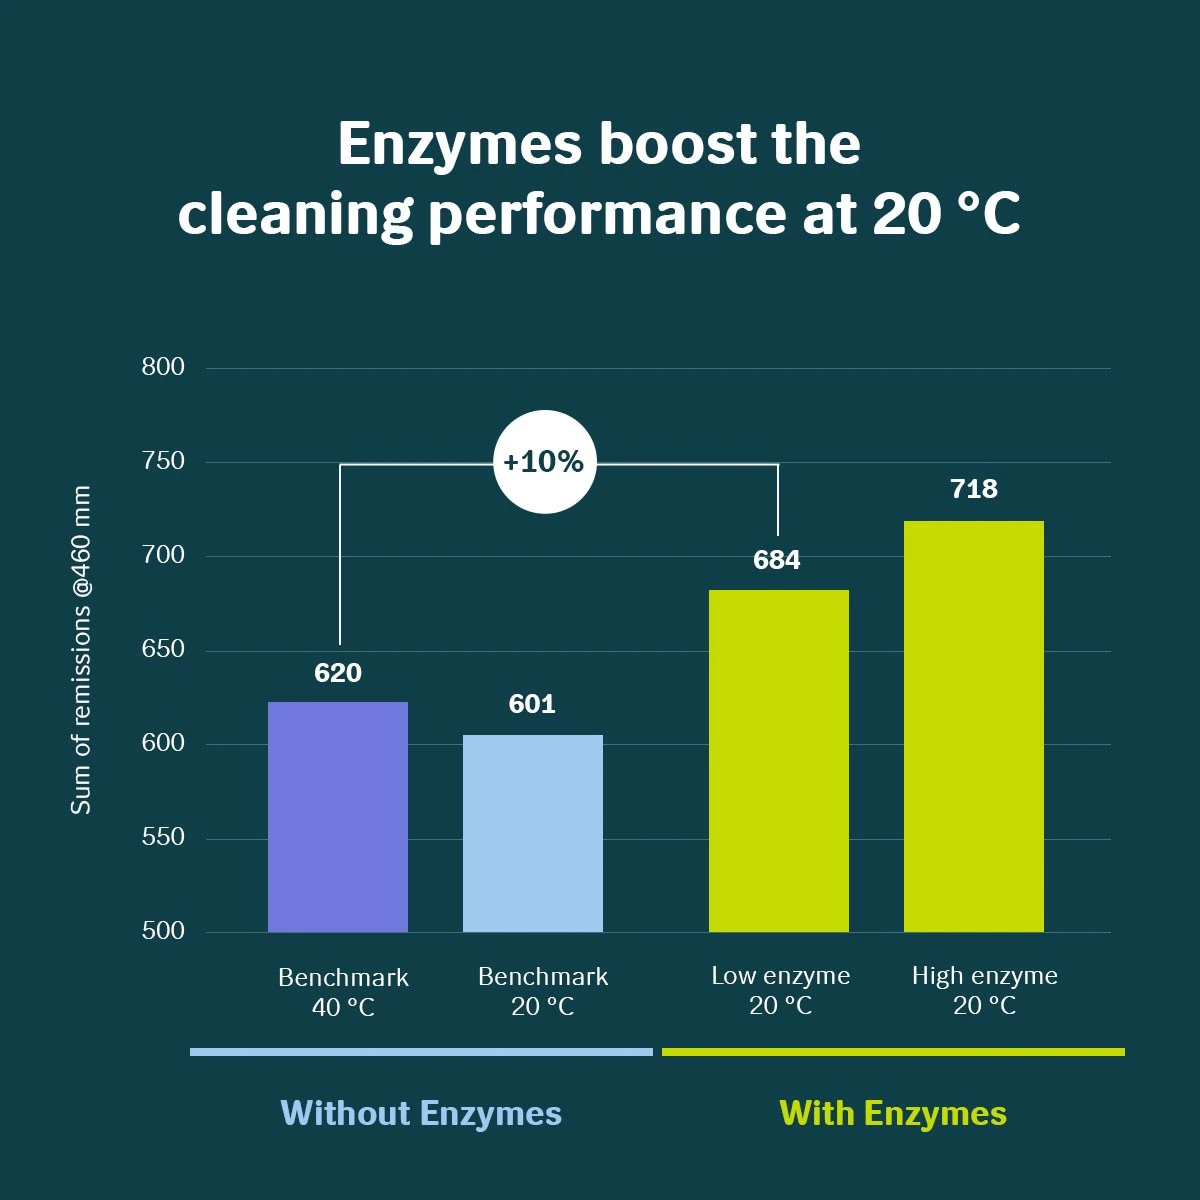 Enzymes boost cleaning performance at 20